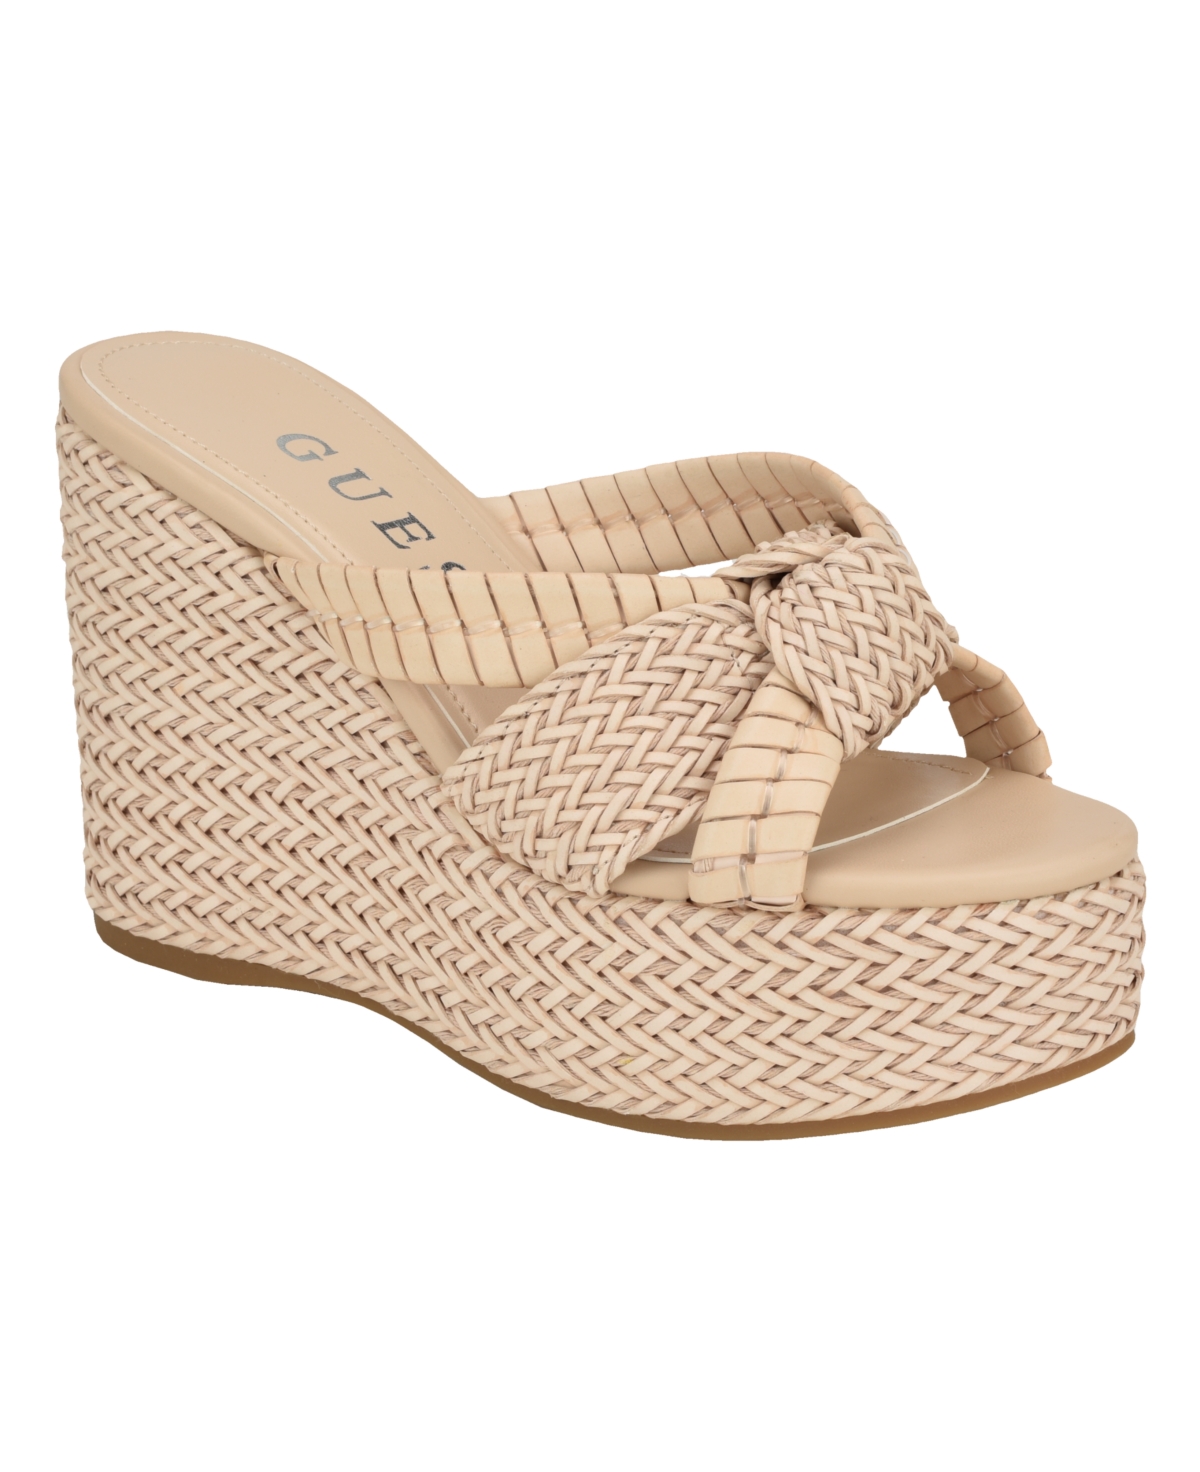 Women's Eveh Knotted Jute Wrapped Platform Wedge Sandals - Light Natural